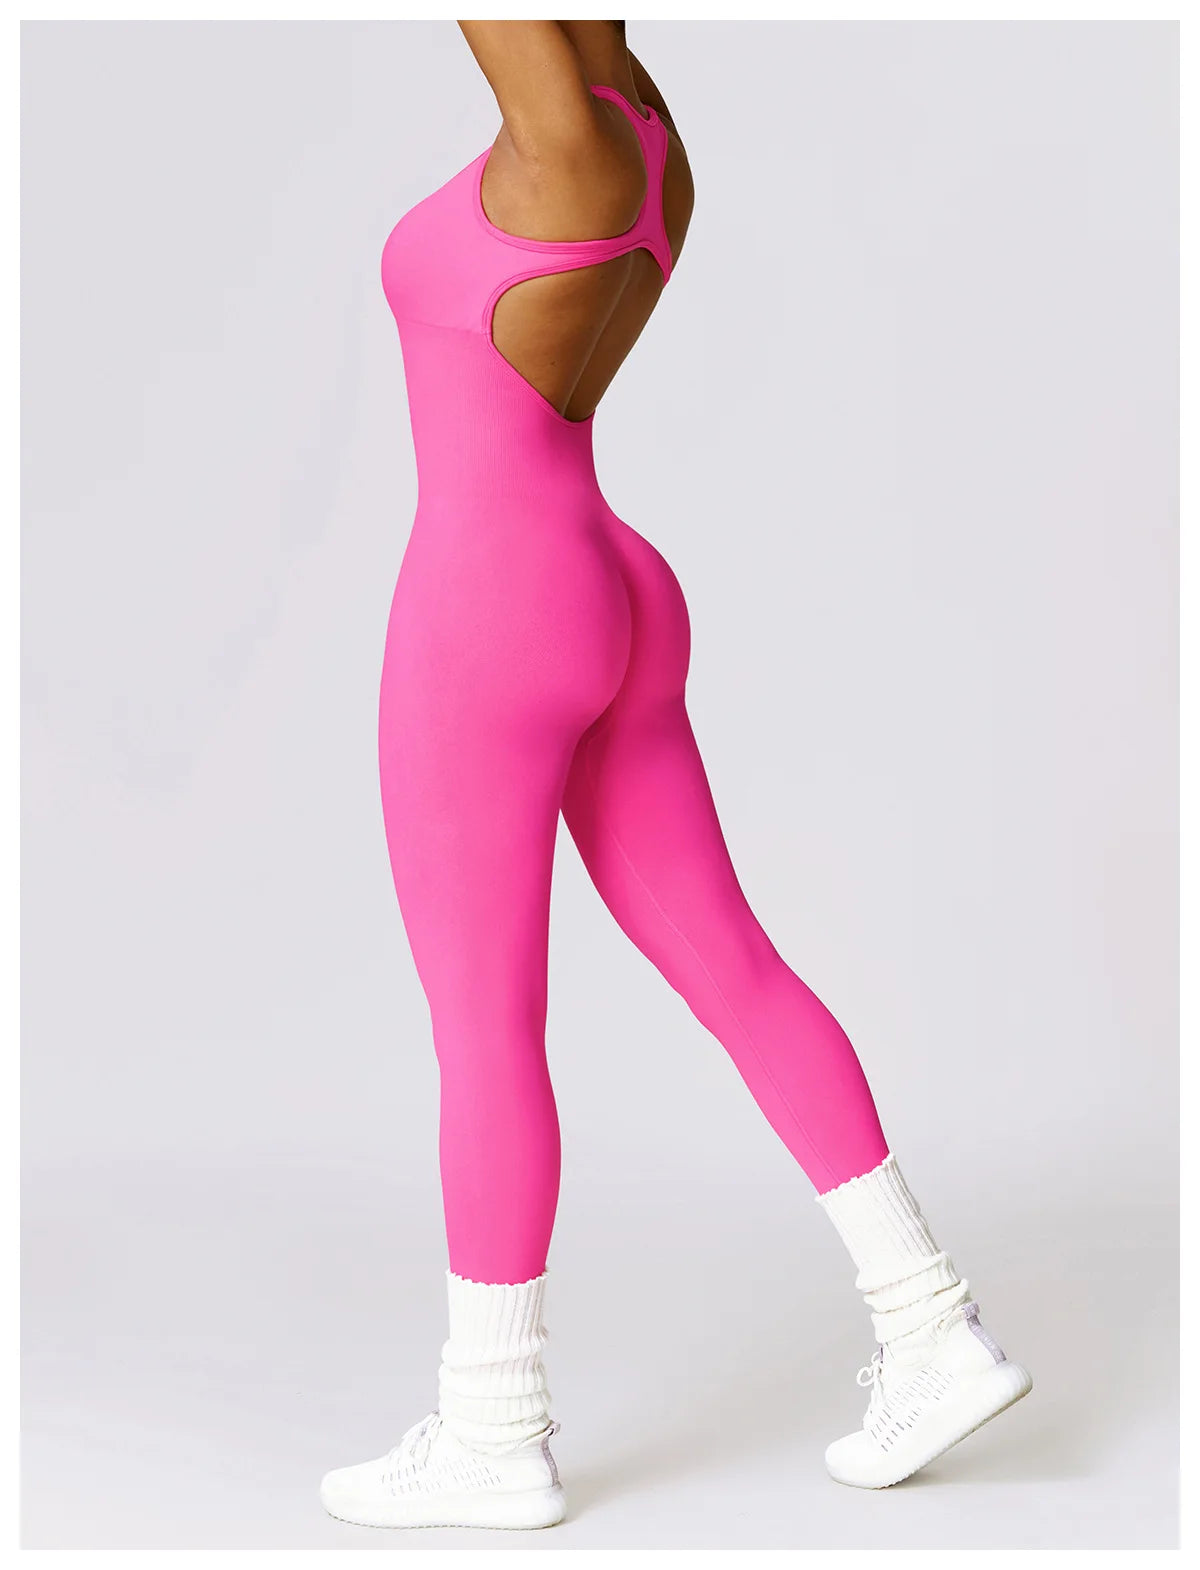 Seamless Gym Sport Jumpsuit Women Sportswear Hollow Backless Scrunch Fitness Overalls Push Up One Pieces Outfit Yoga Wear The Clothing Company Sydney